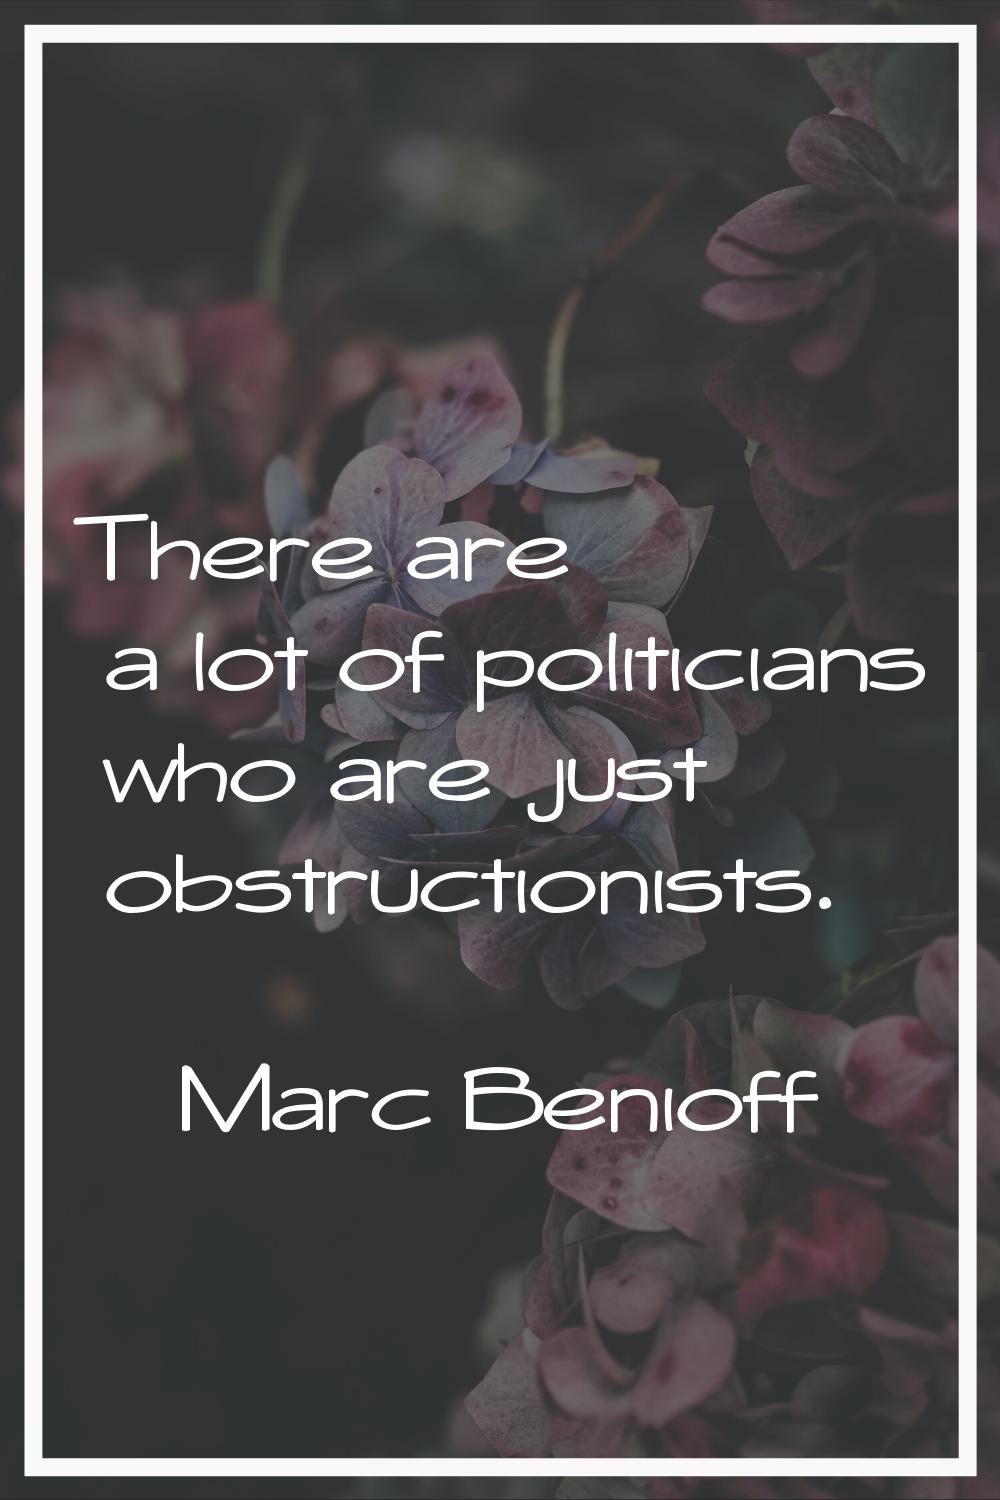 There are a lot of politicians who are just obstructionists.